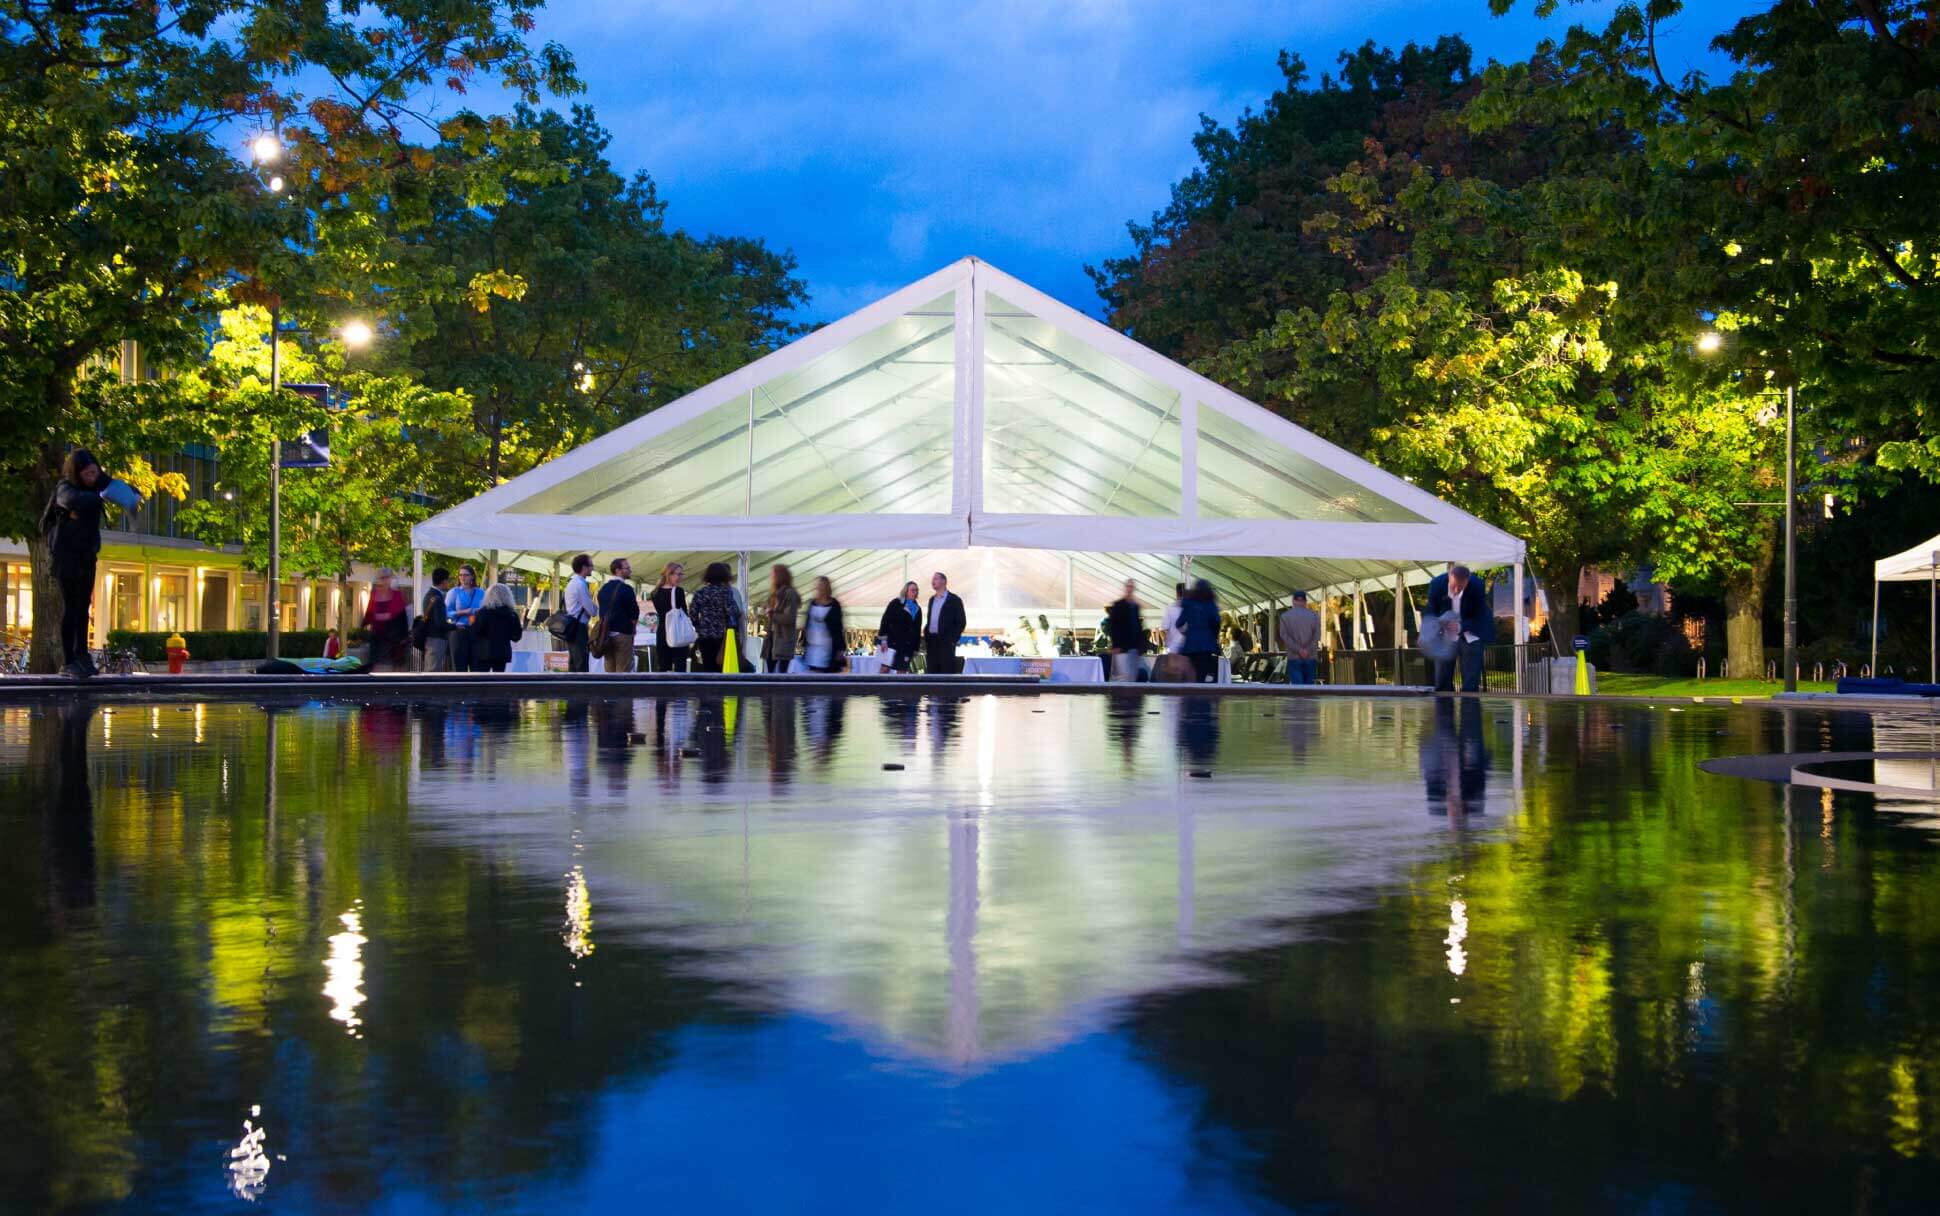 Visitors enjoy an evening event under a white tent along Main Mall at UBC Vancouver.